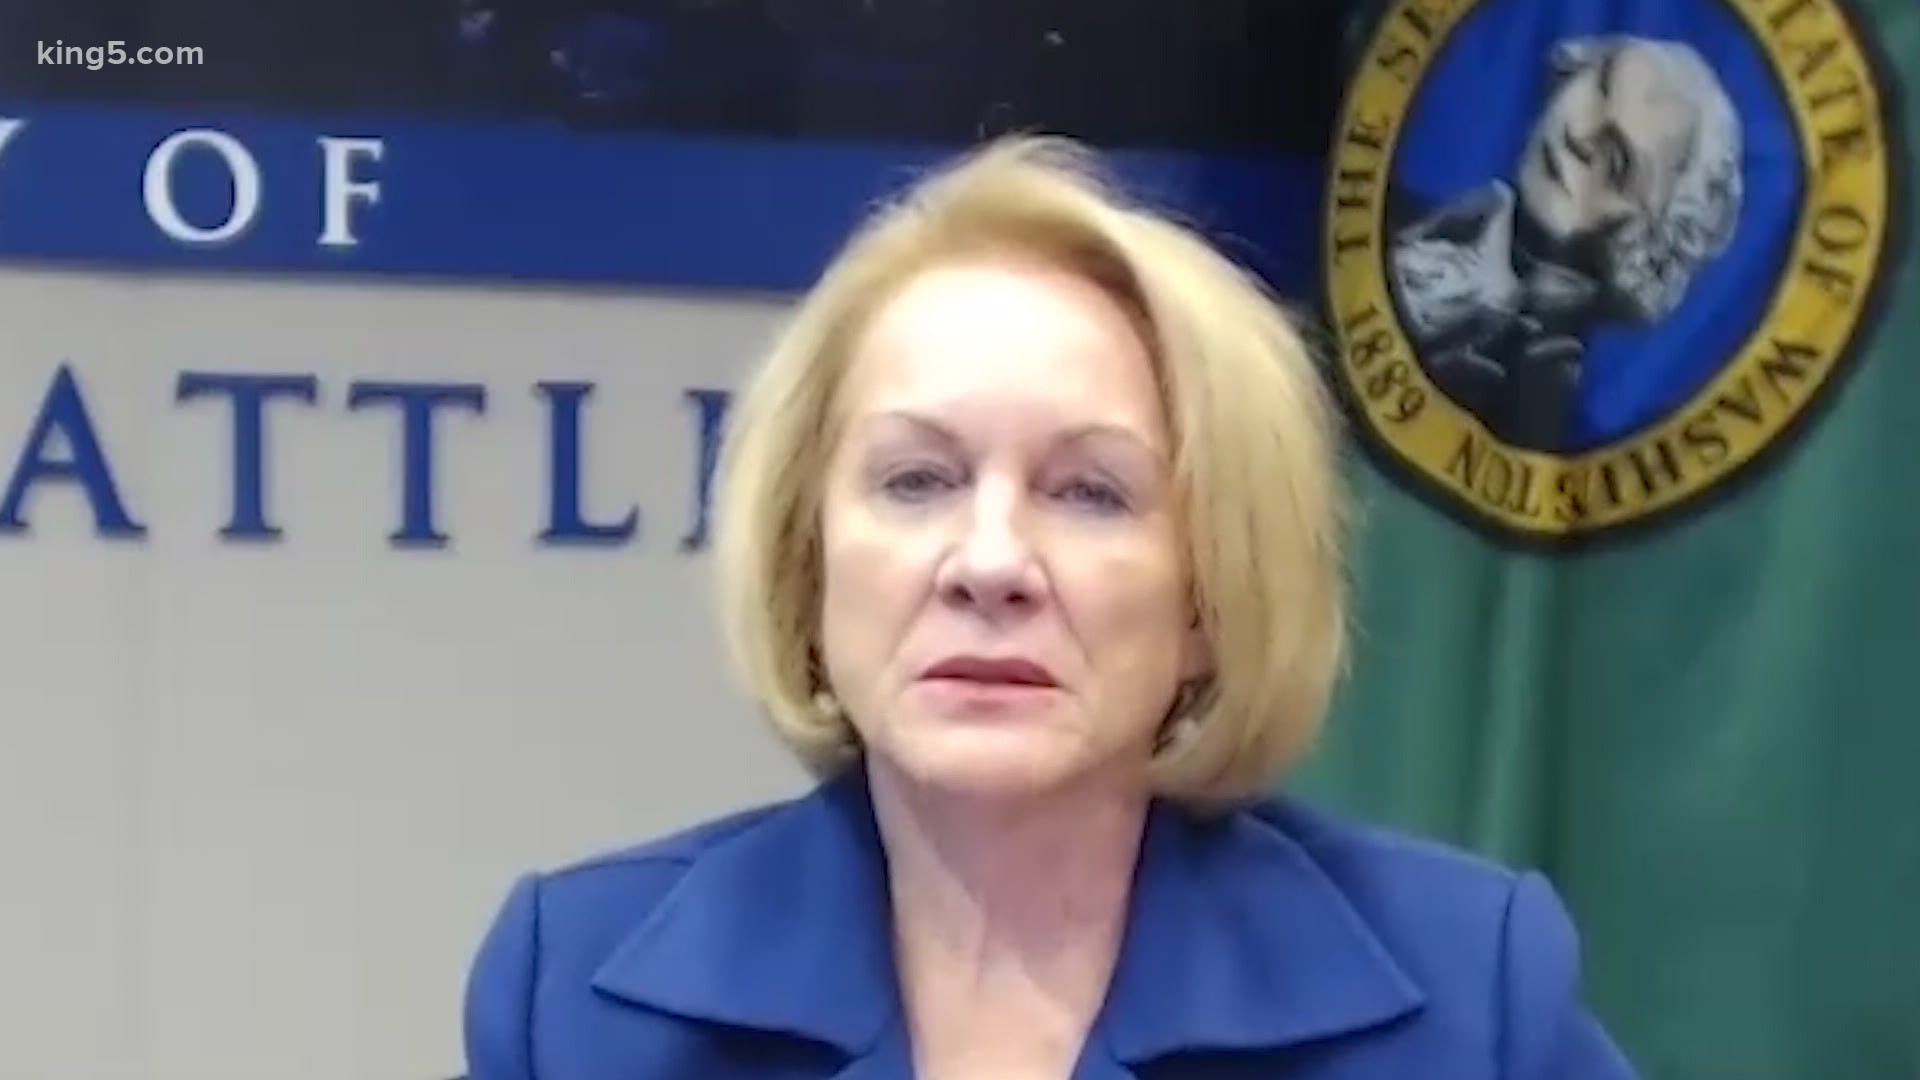 Seattle Mayor Jenny Durkan reacts to the city council’s override of her police funding vetoes and says it isn’t time to search for a new police chief yet.